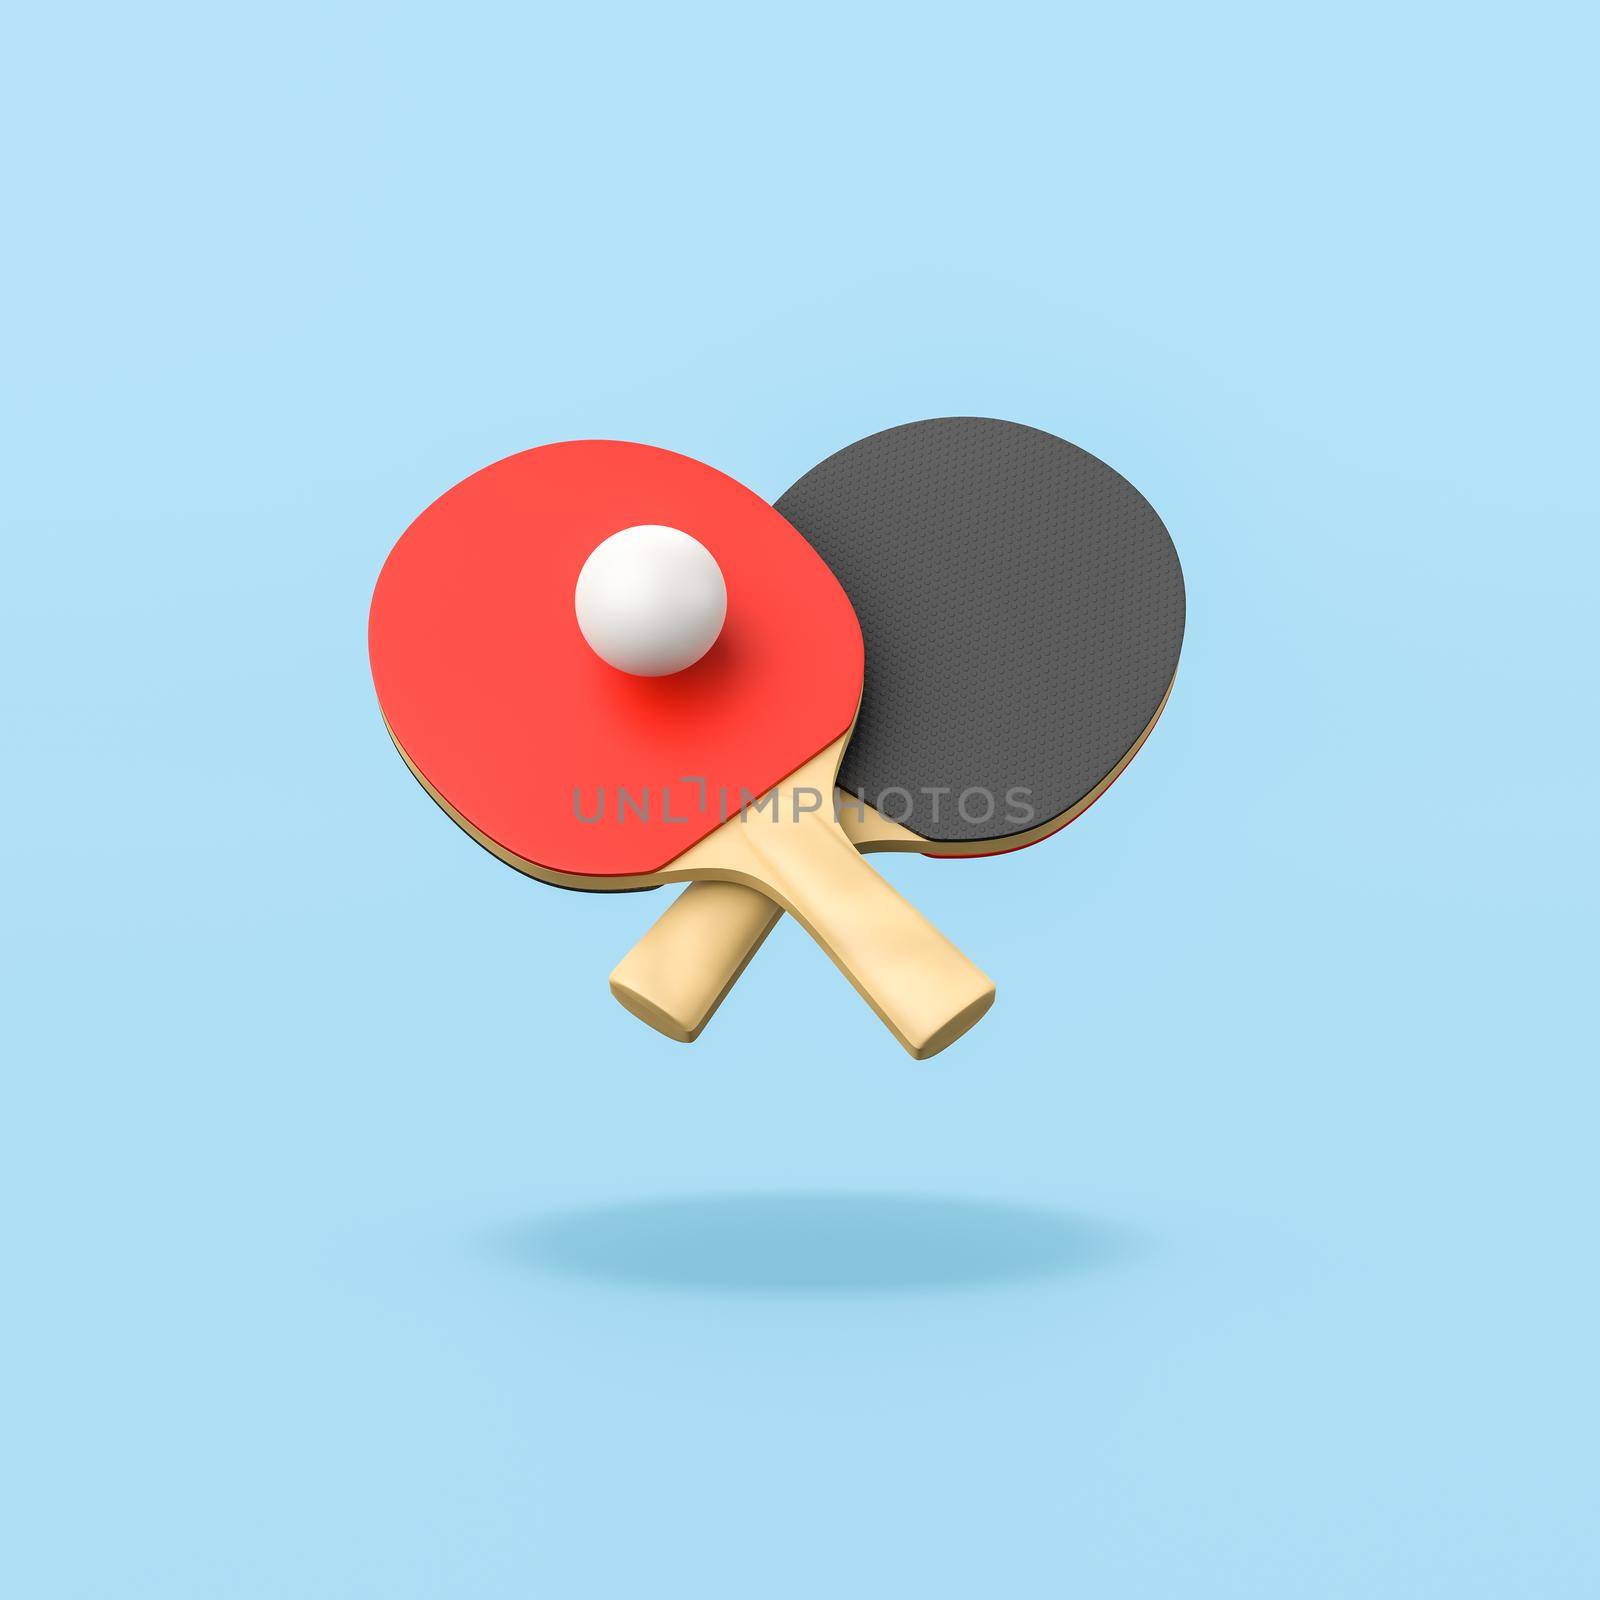 Ping-Pong Game on Blue Background by make